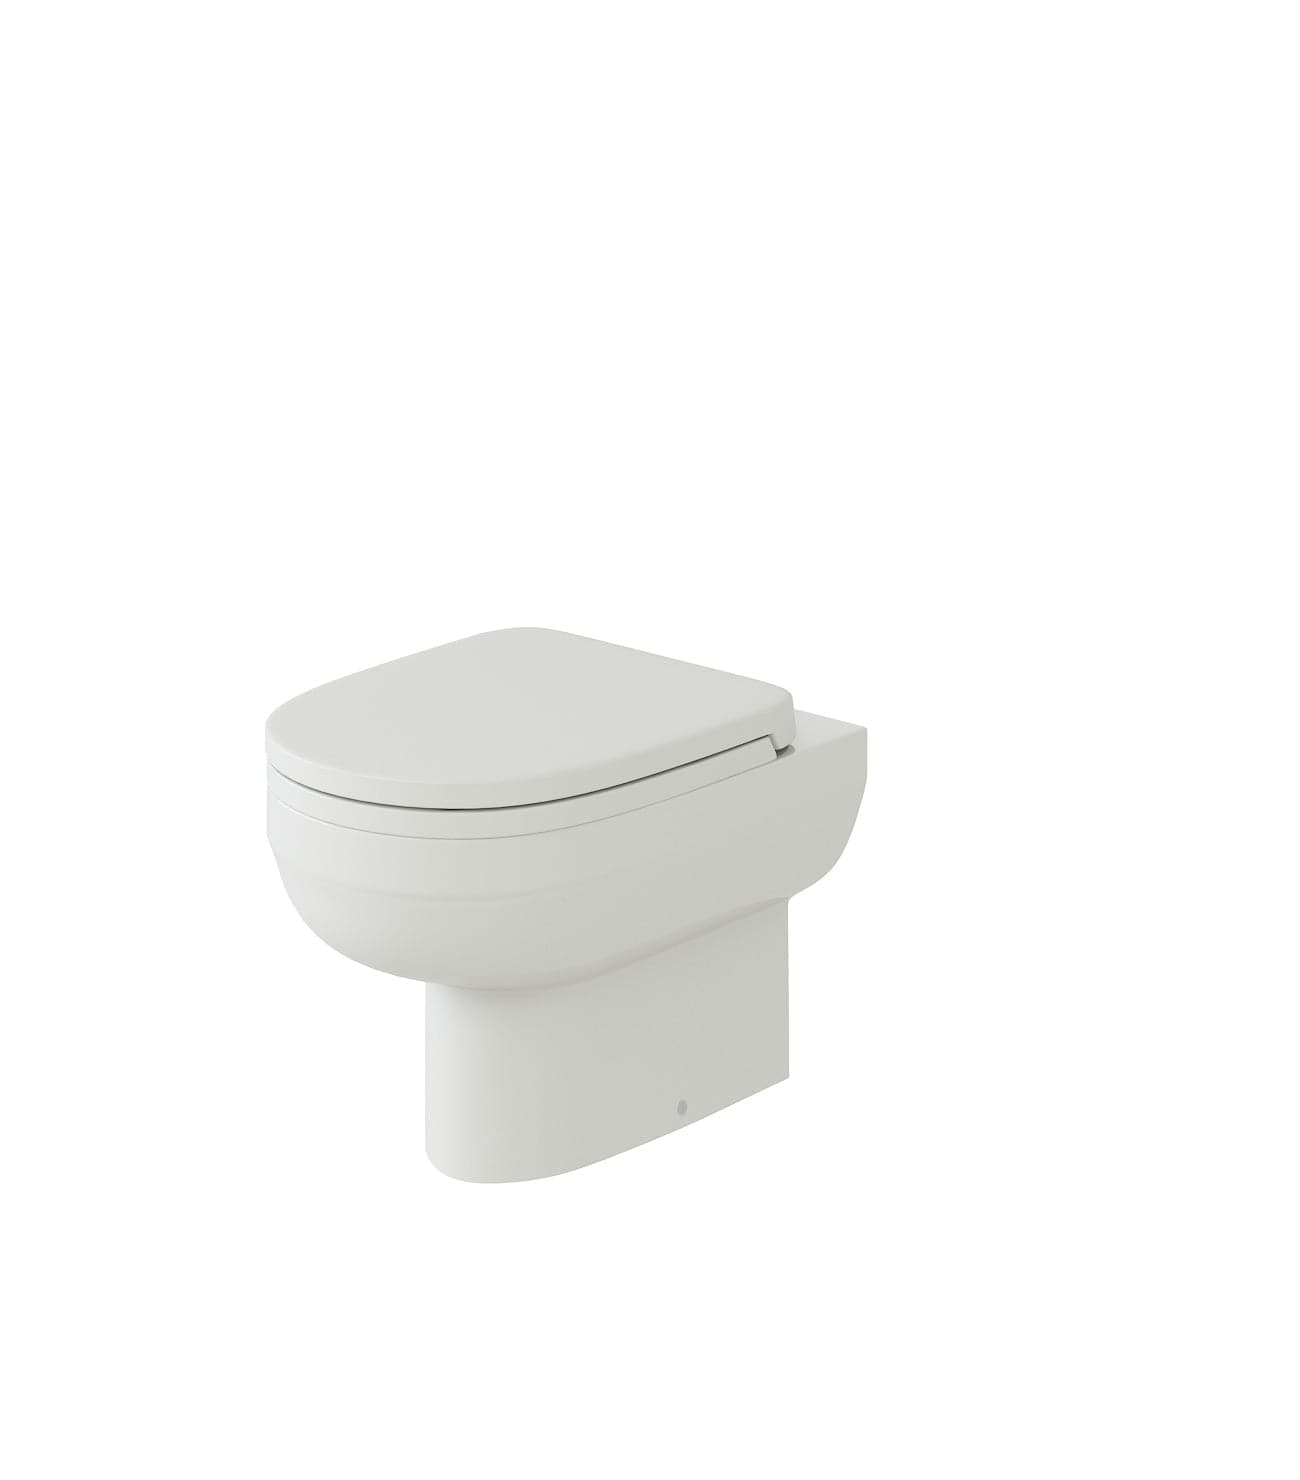 Gamma L Shape Vanity & WC Unit in RH configuration, Gloss White finish, space-saving, contemporary design, complete with a toilet. Perfect for modern UK bathrooms.